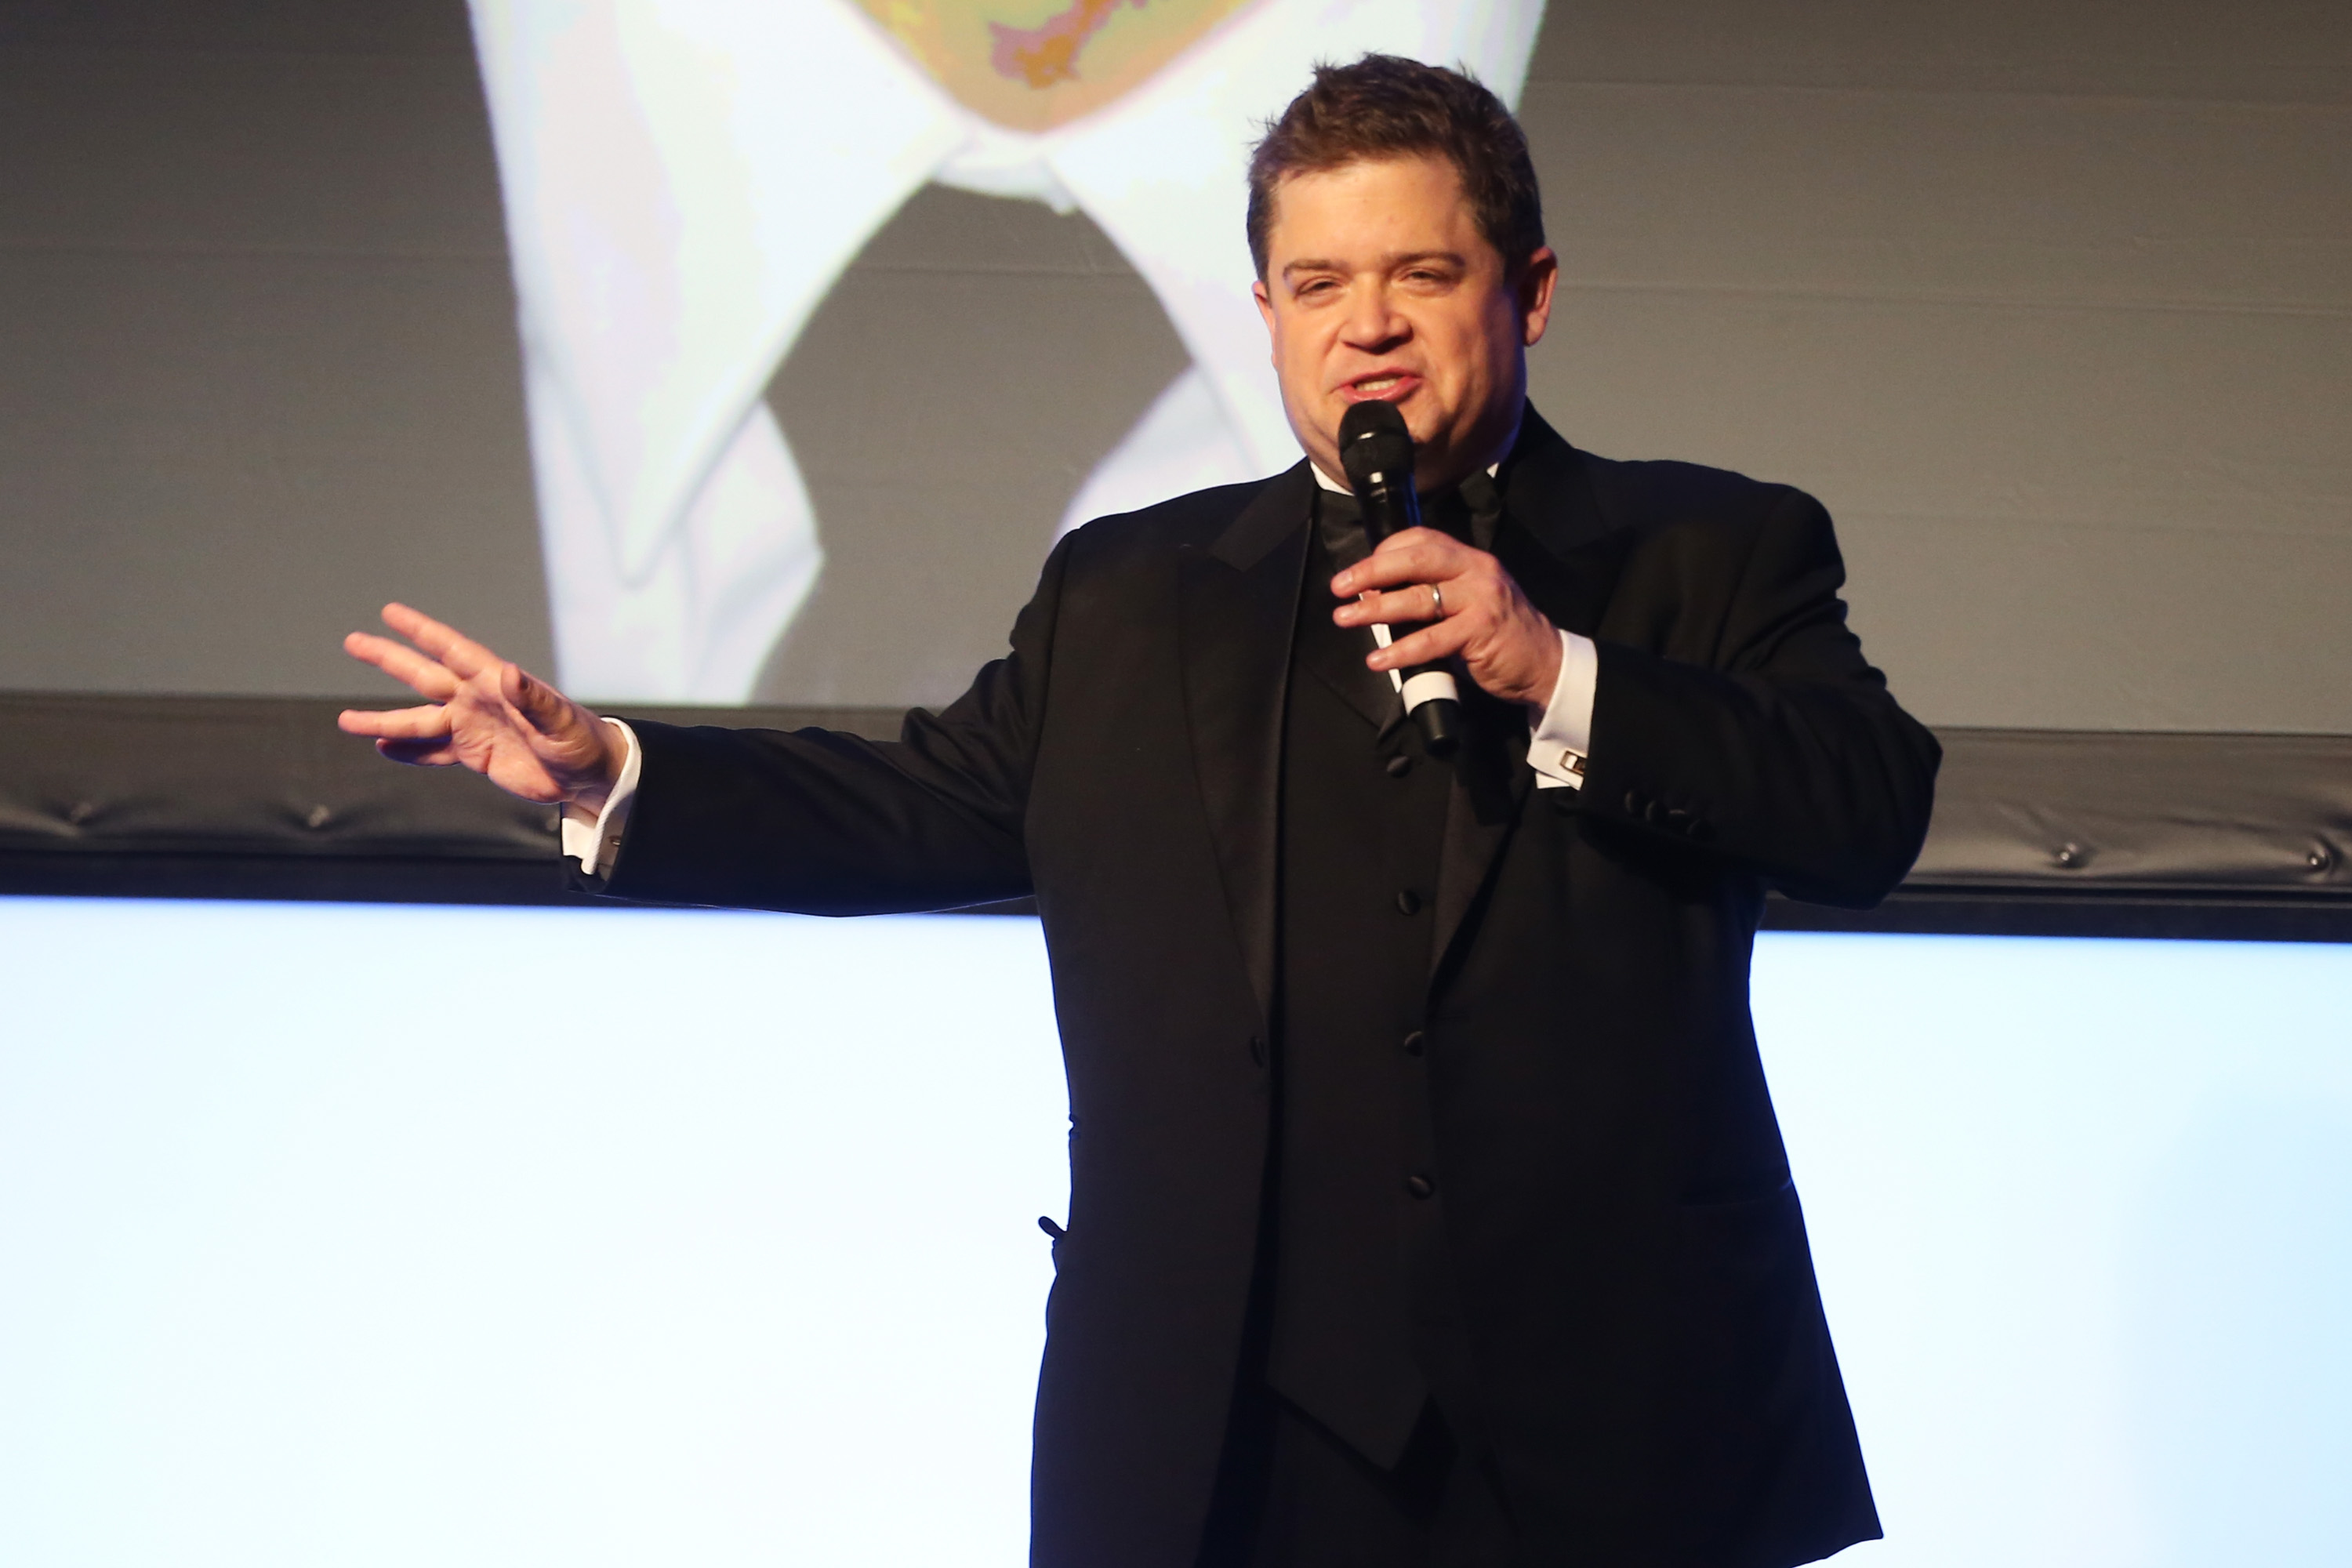 Image: Patton Oswalt speaks onstage during the 26th American Cinematheque Award Honoring Ben Stiller - Show